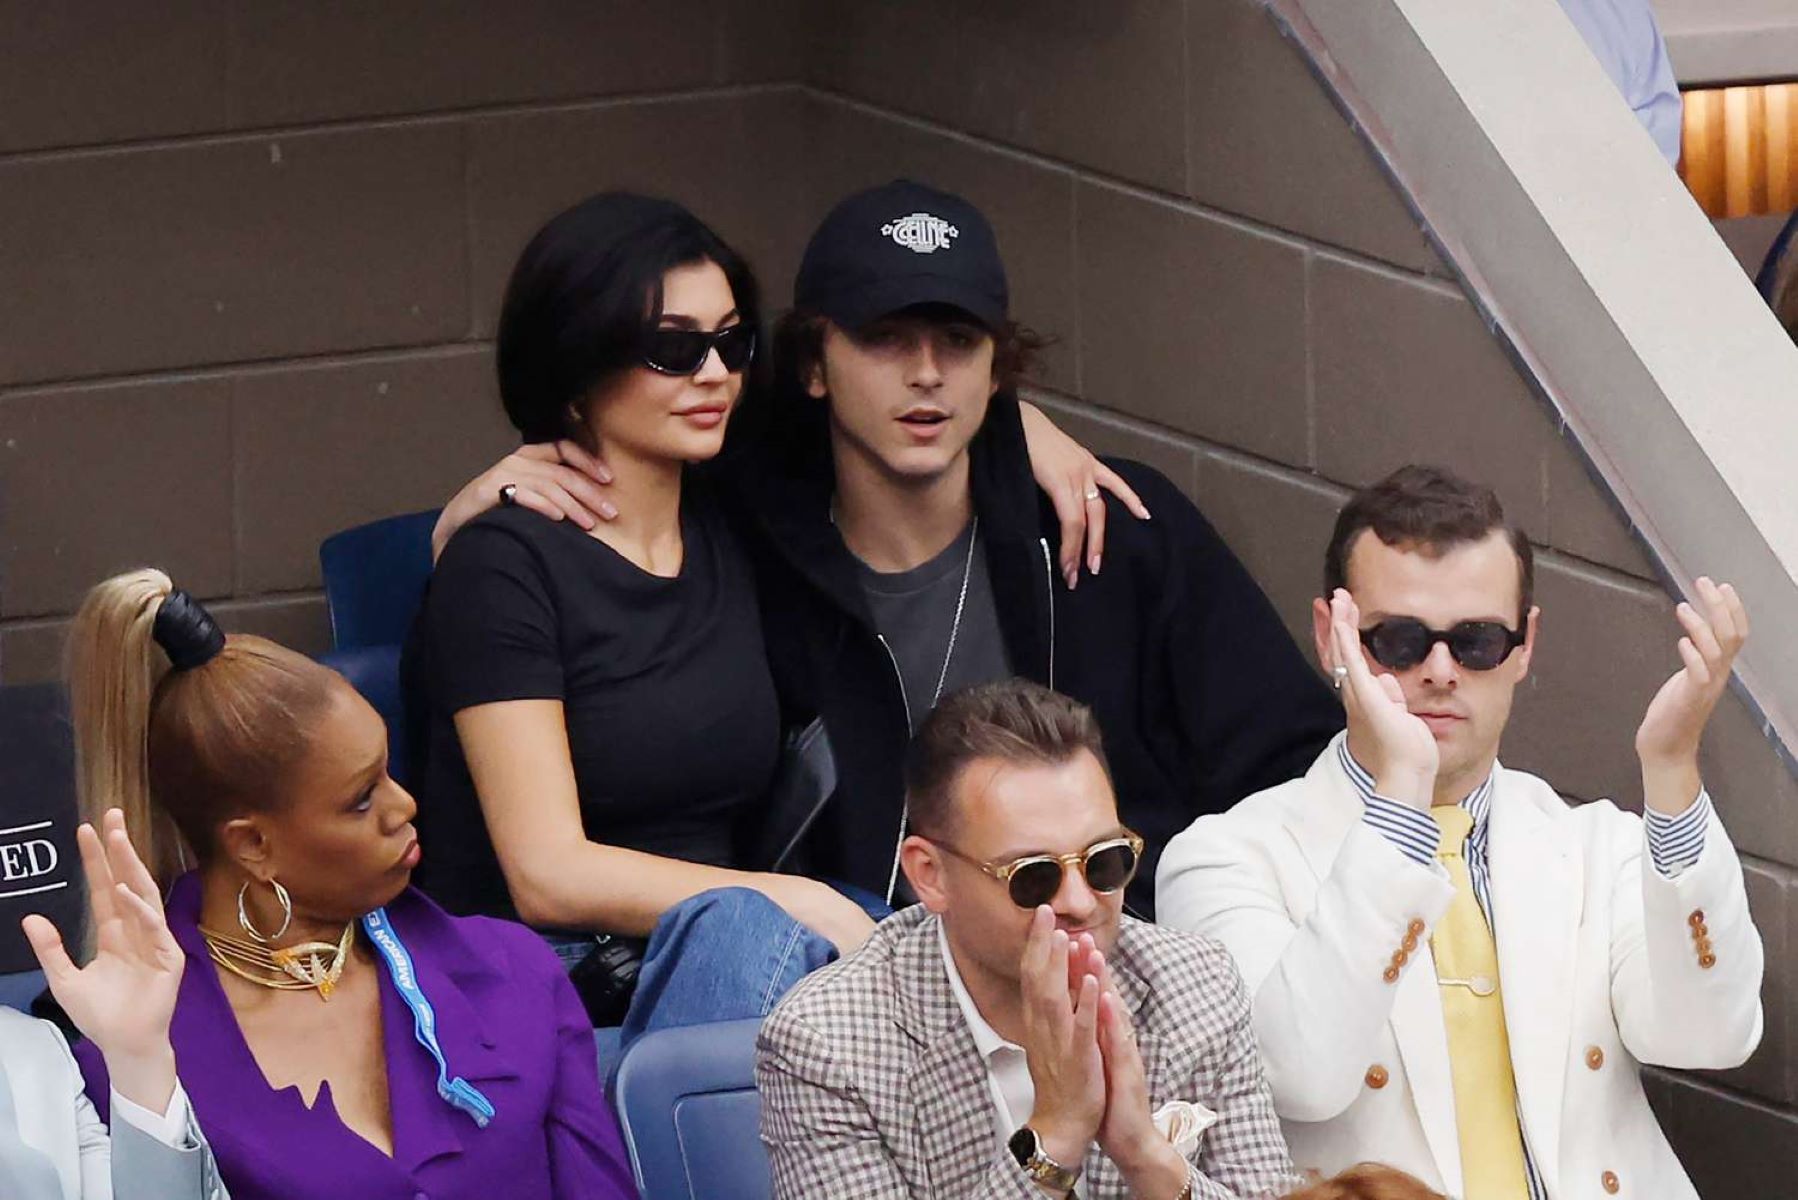 kylie-jenner-and-timothee-chalamet-spotted-together-at-the-us-open